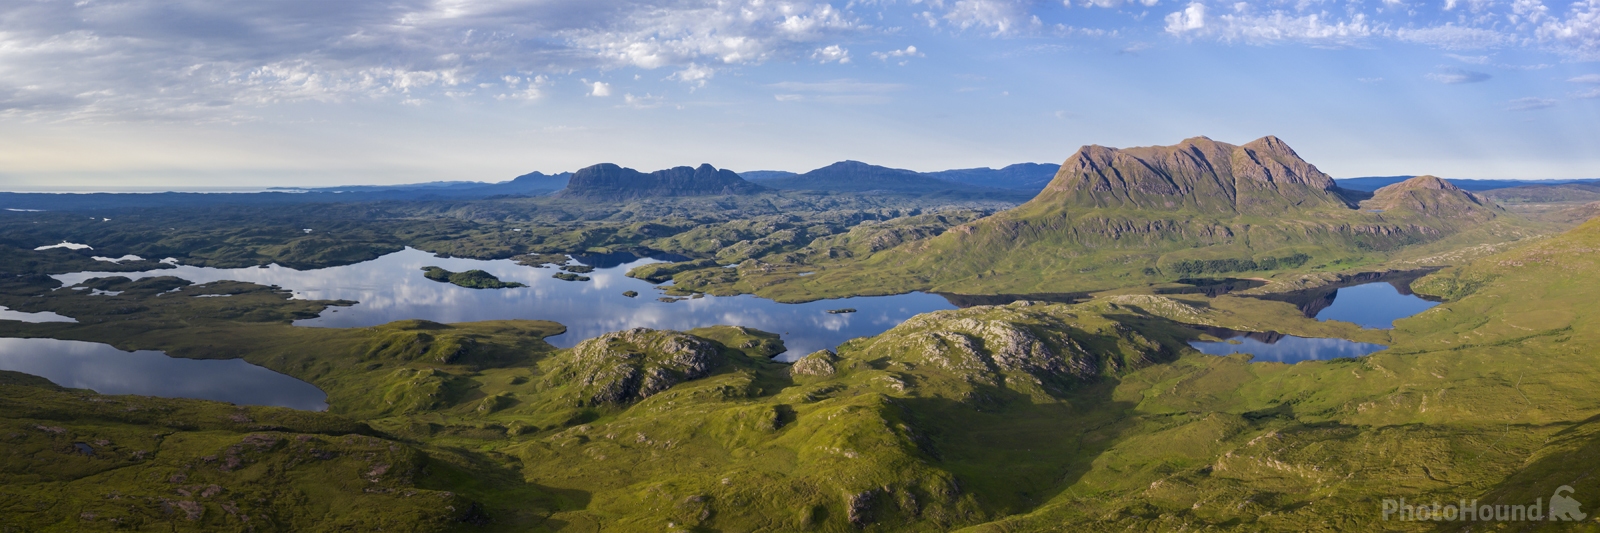 Image of Stac Pollaidh by Jeremy Woodhouse